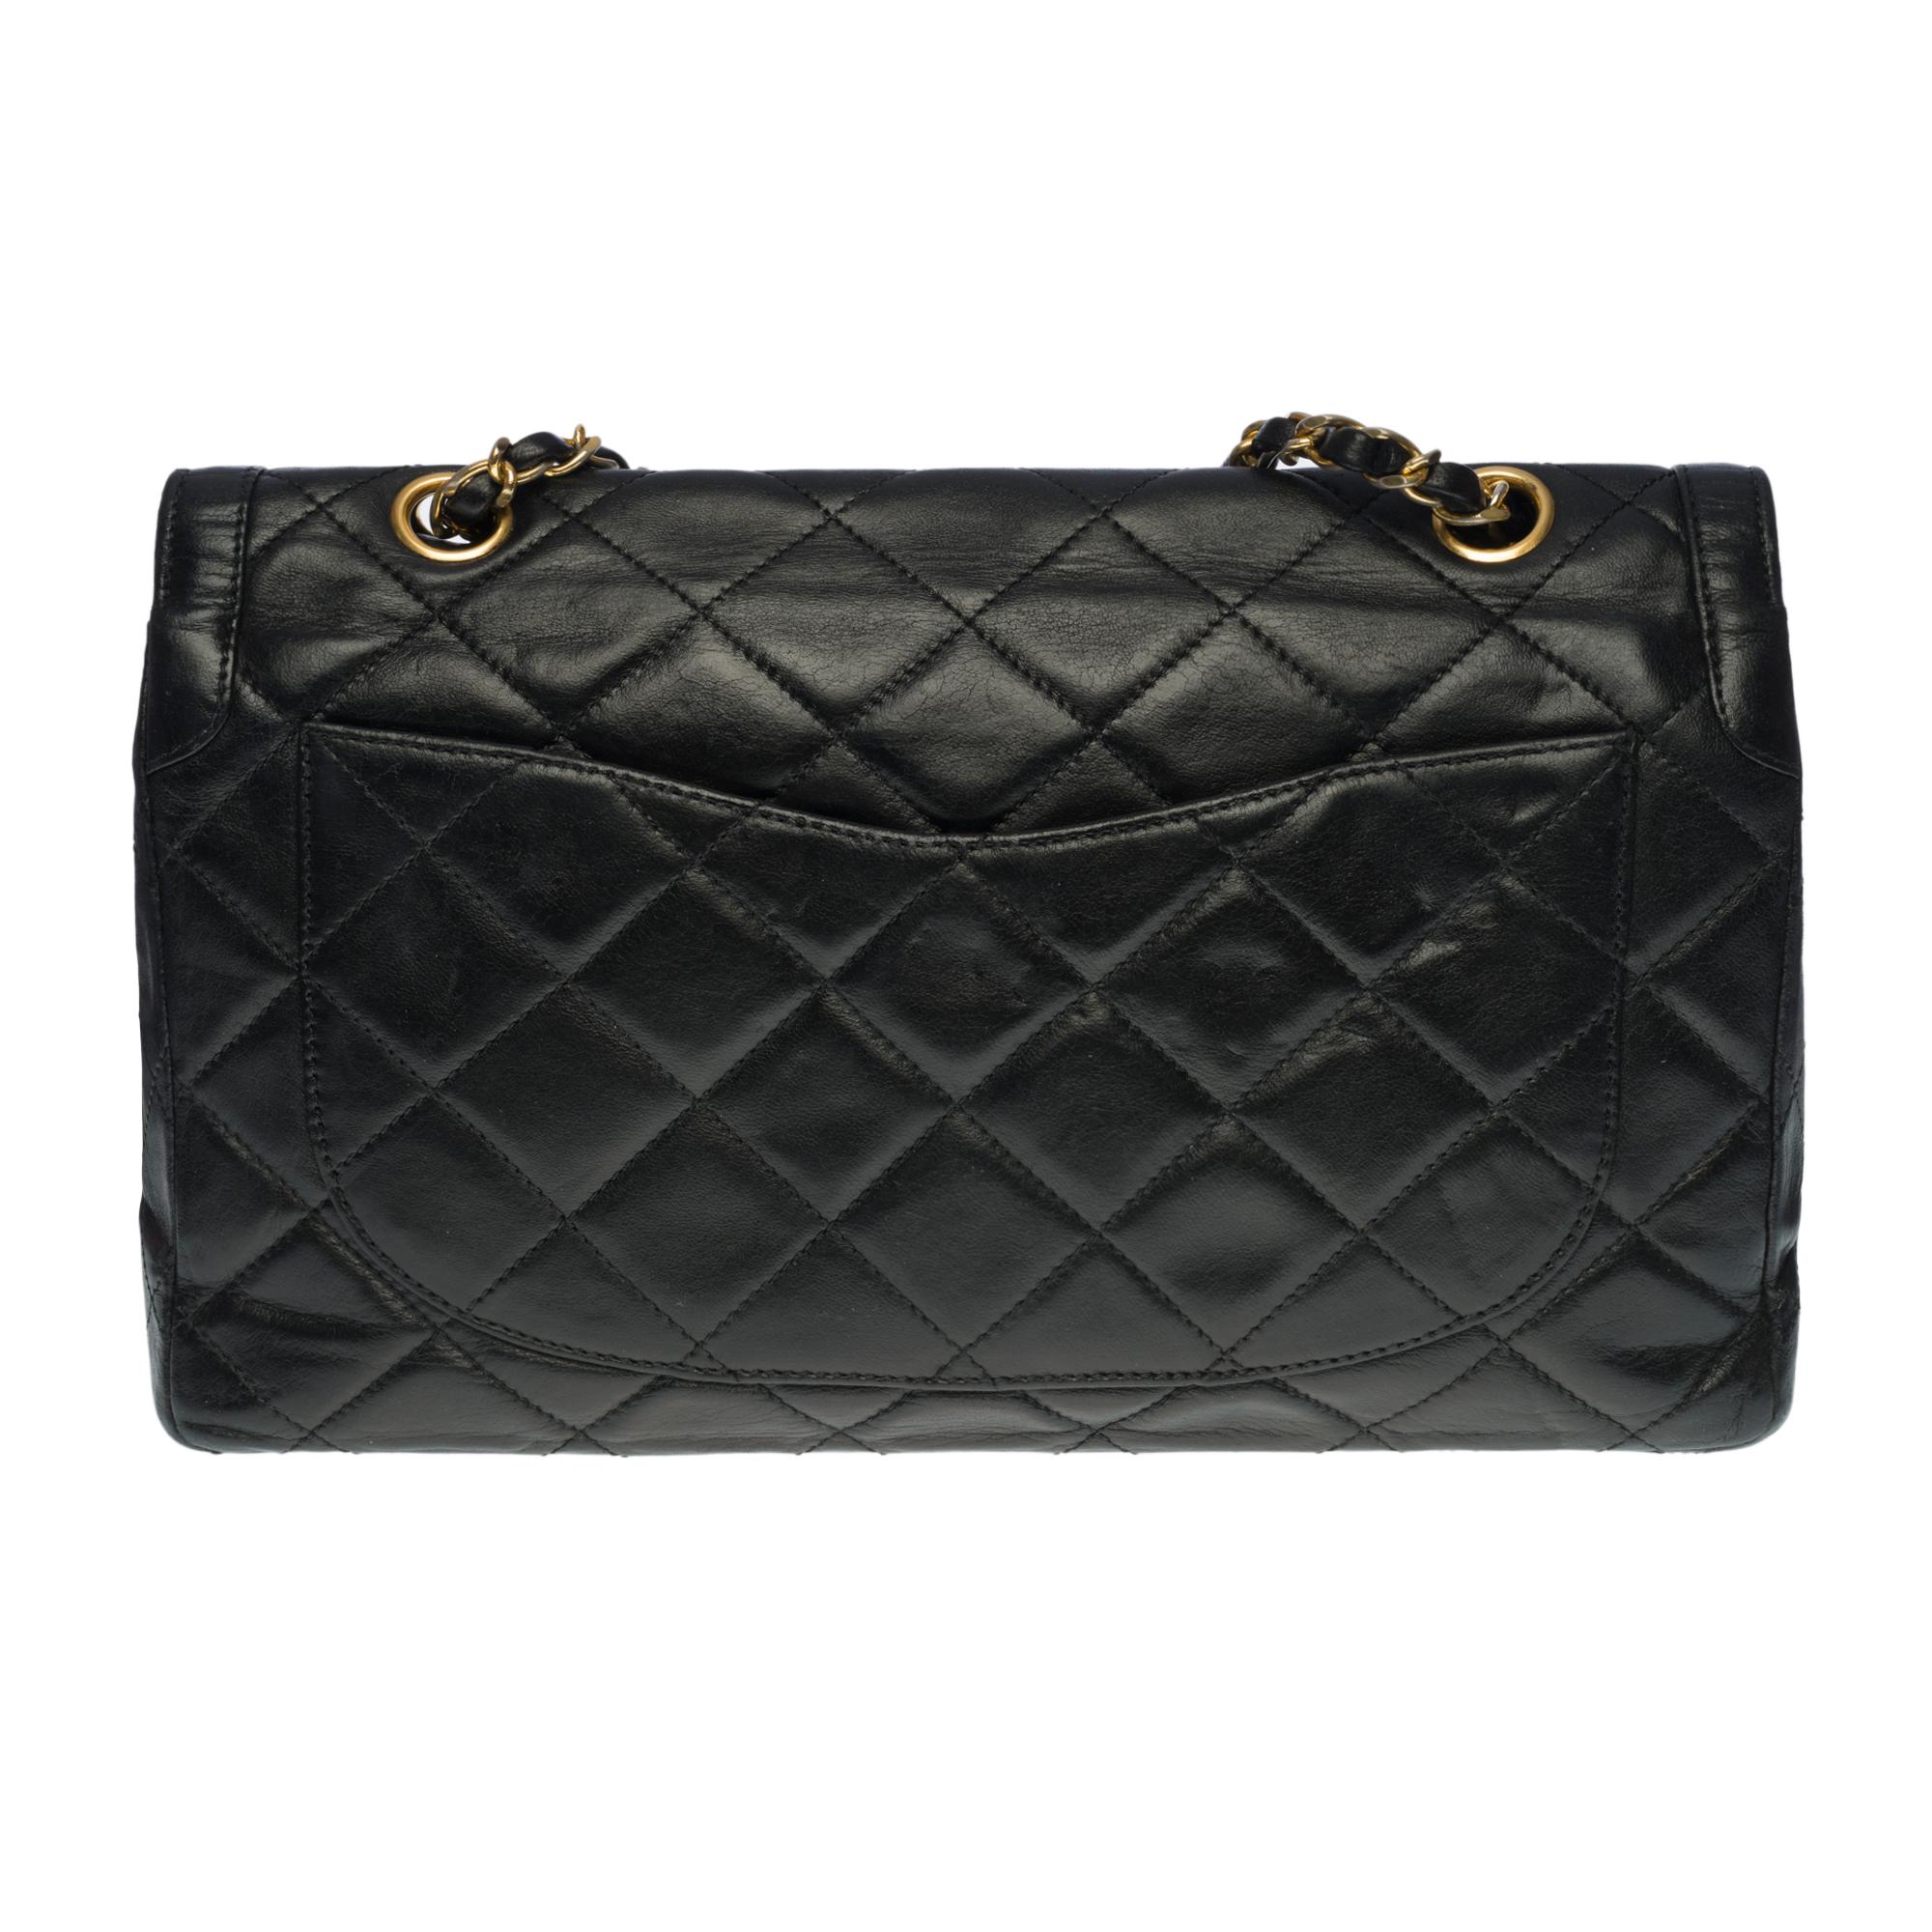 Beautiful Chanel Classic double flap shoulder bag in black quilted lambskin leather, gold-plated hardware, a gold-plated metal chain handle interlaced with black leather allowing a shoulder and shoulder strap
BAckpack pocket
Flap closure, two-tone